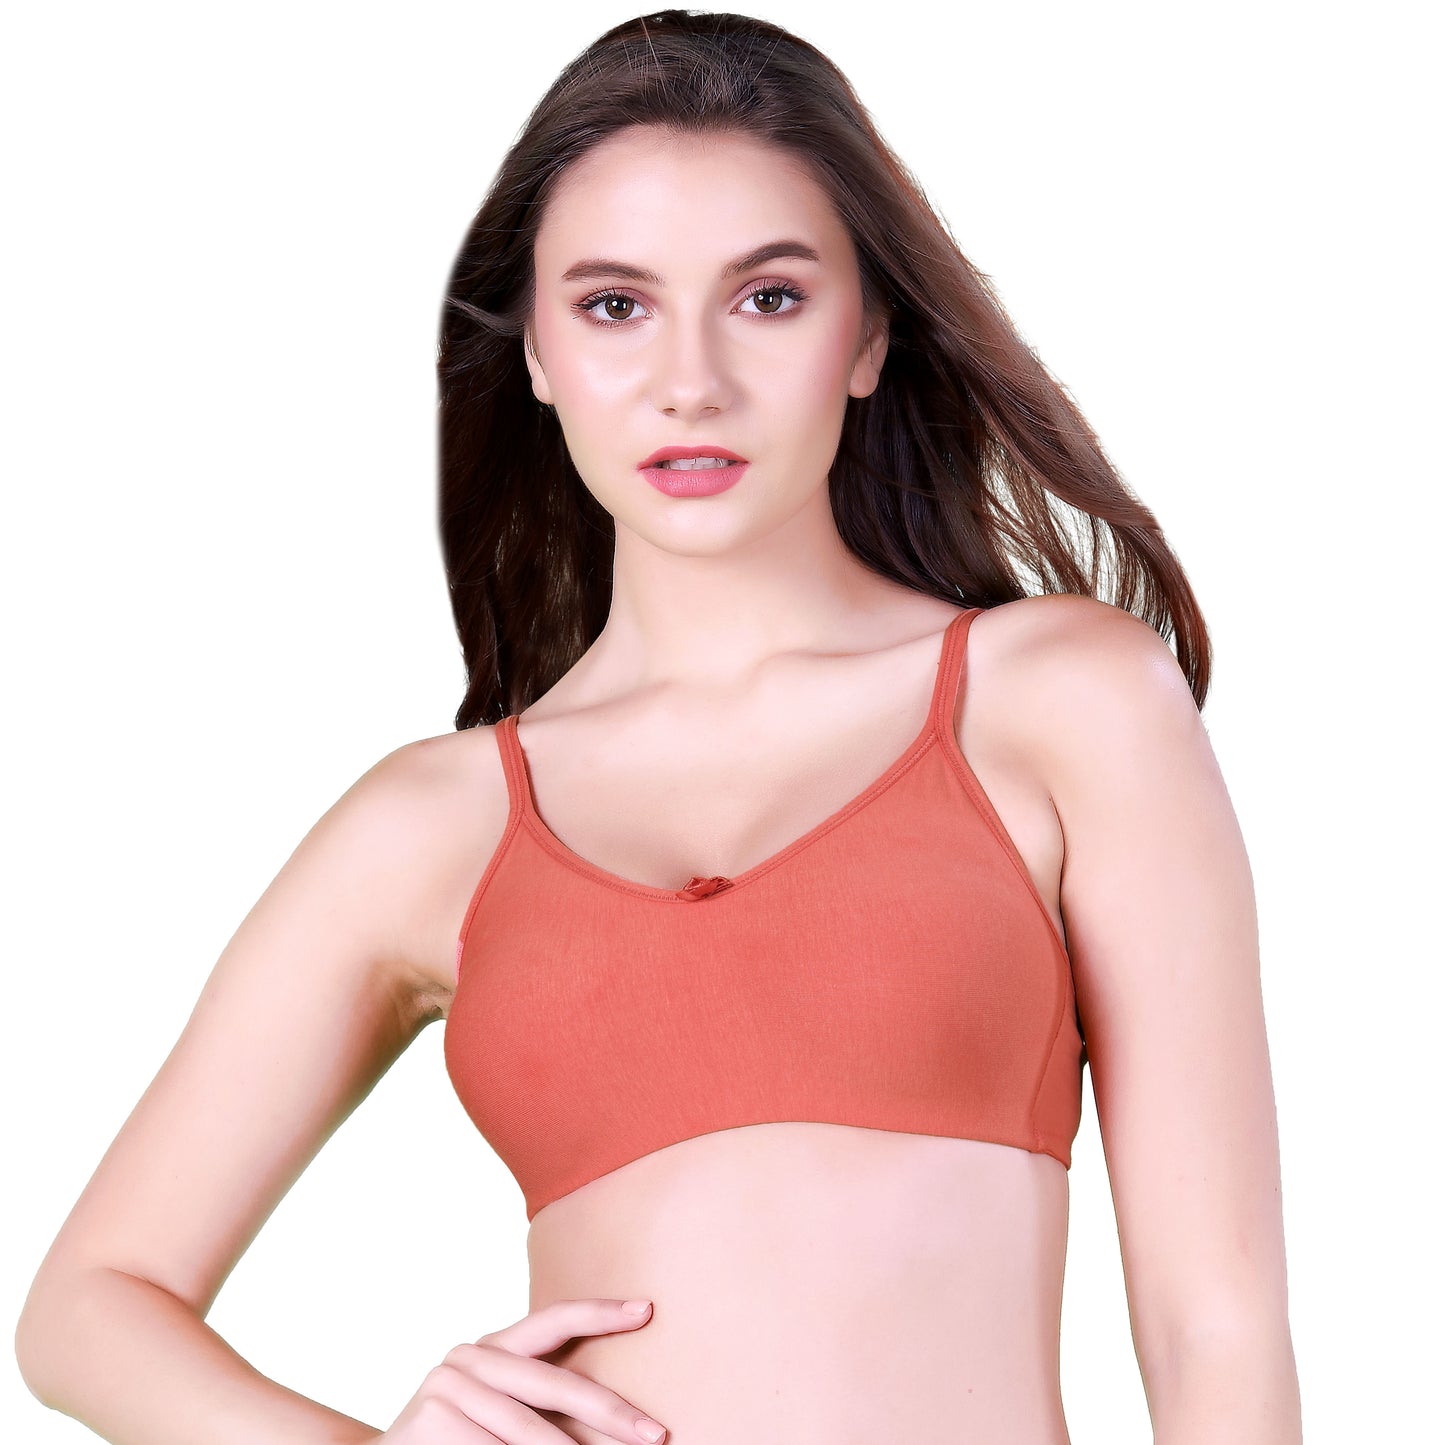 ICE BRA / B-CUP / NON-PADDED / NON-WIRED / SPORTS WEAR / TEENAGE BRA / FULL CUP BRA